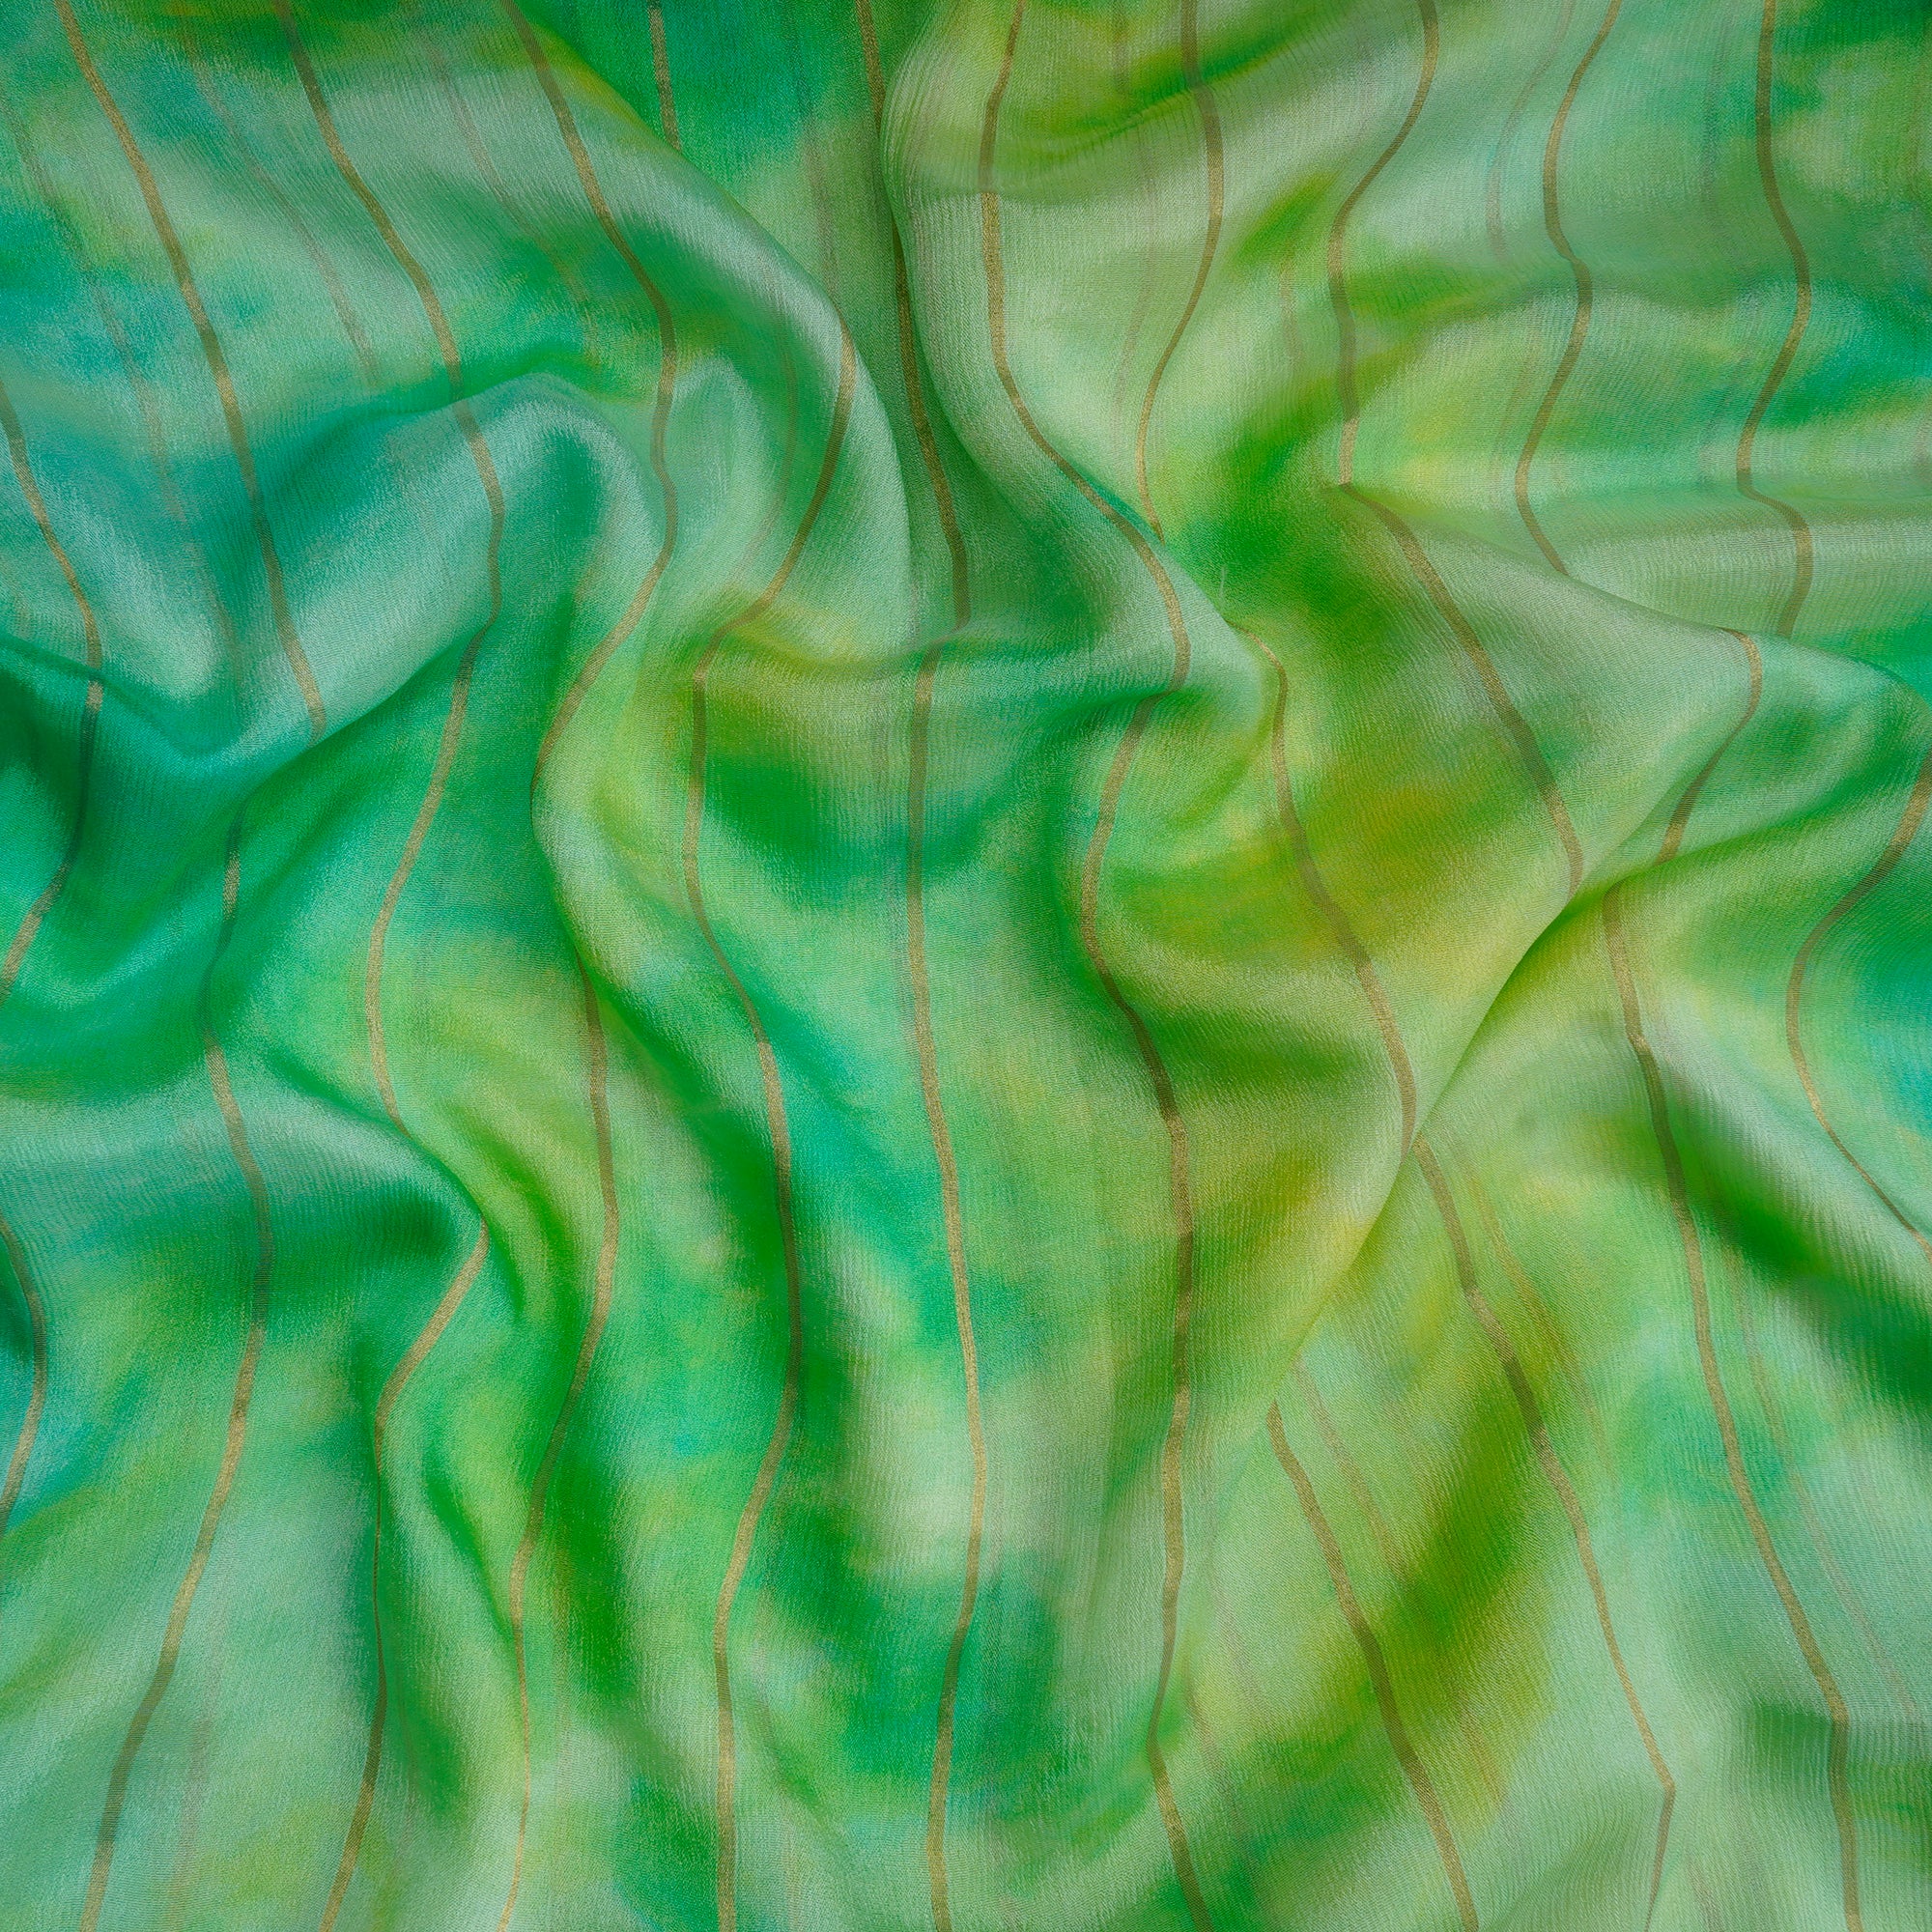 Green Color Handcrafted Tie and Dye Printed Crepe Fabric